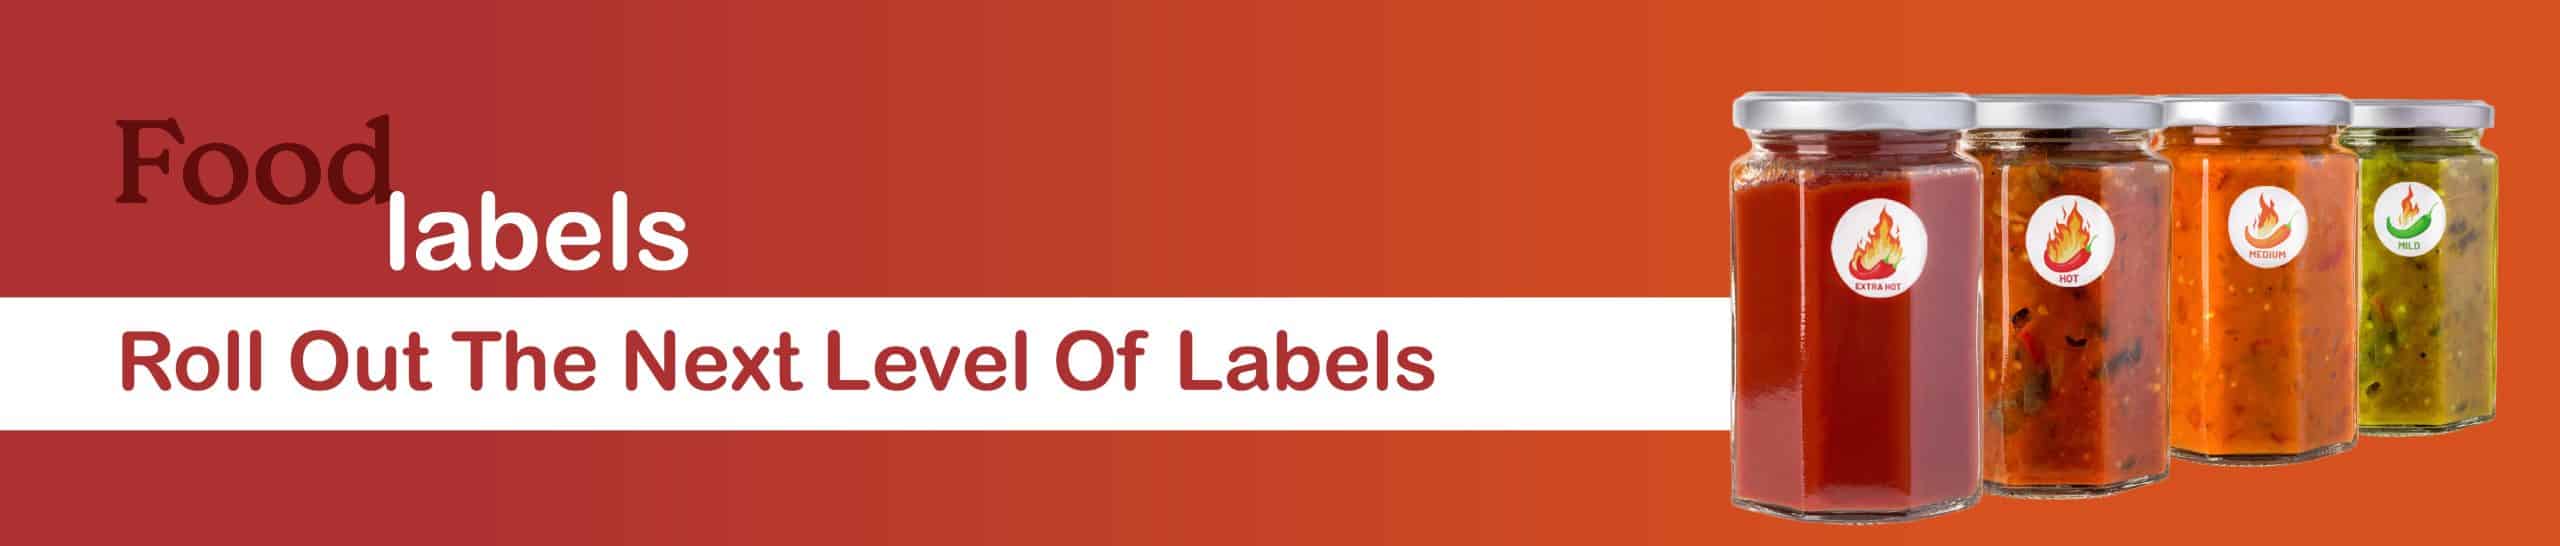 Food Labels: Rool Out The Next Levels Of Labels